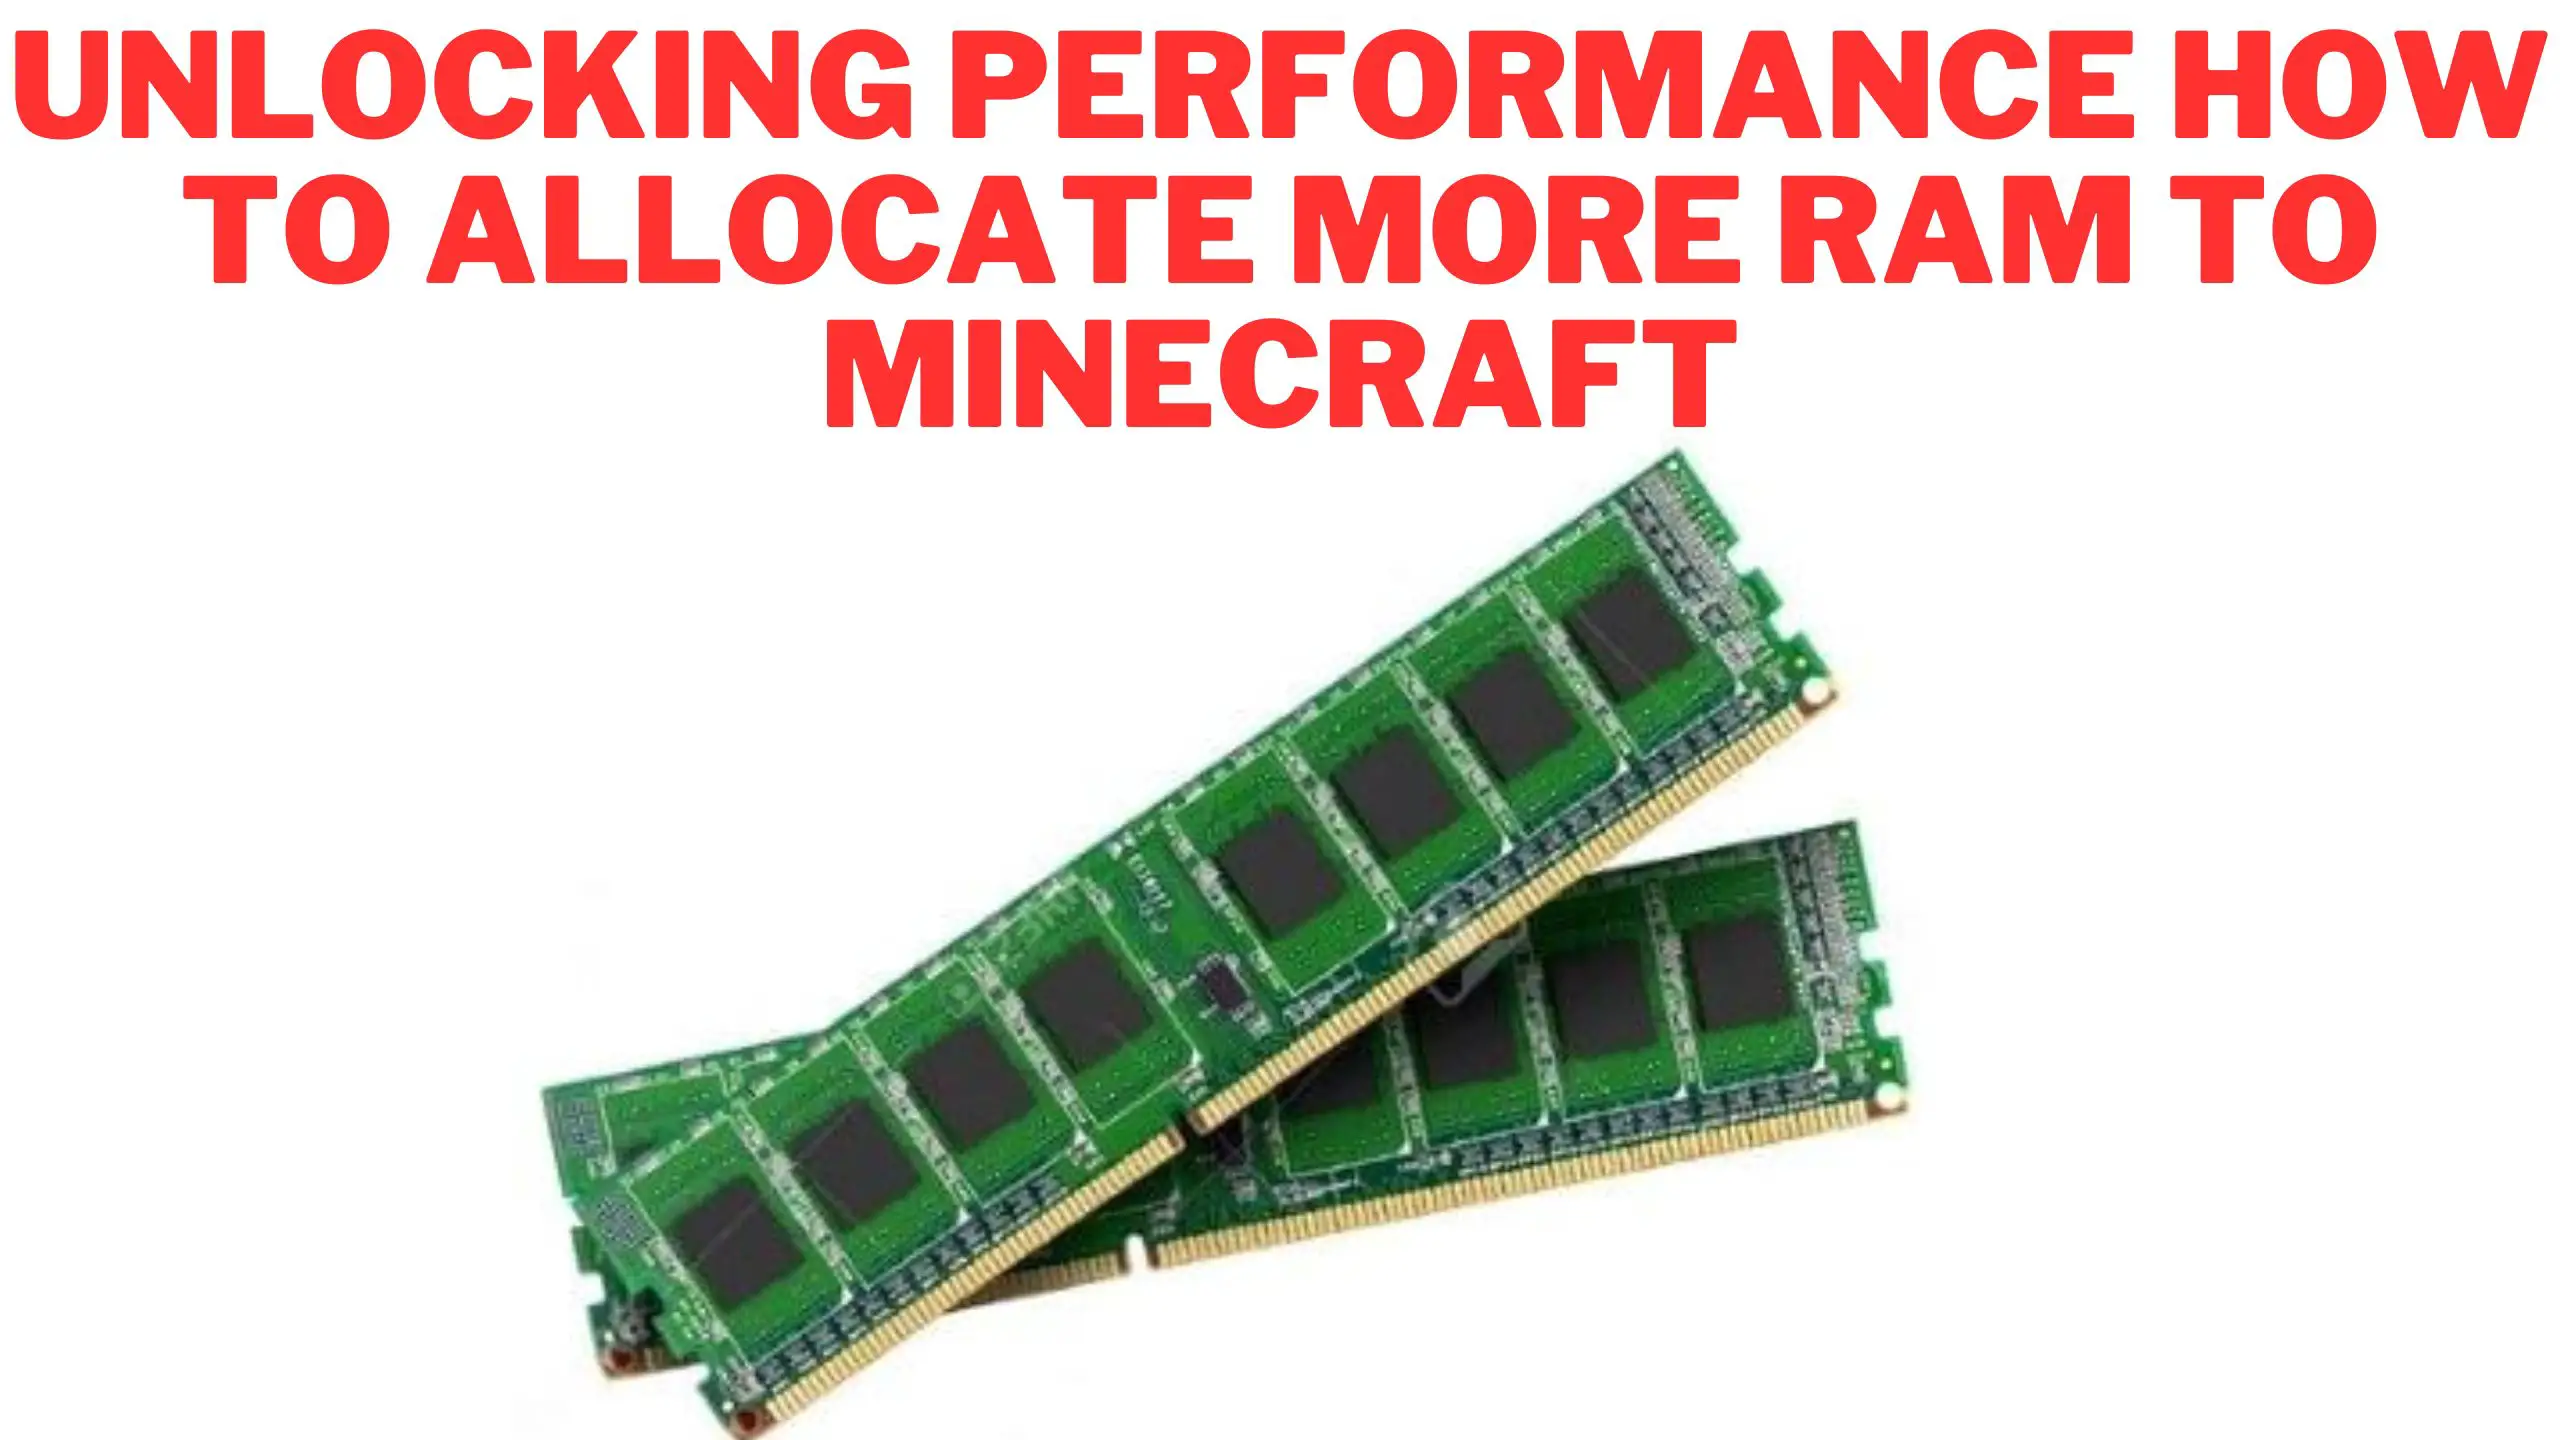 Unlocking Performance How to Allocate More RAM to Minecraft